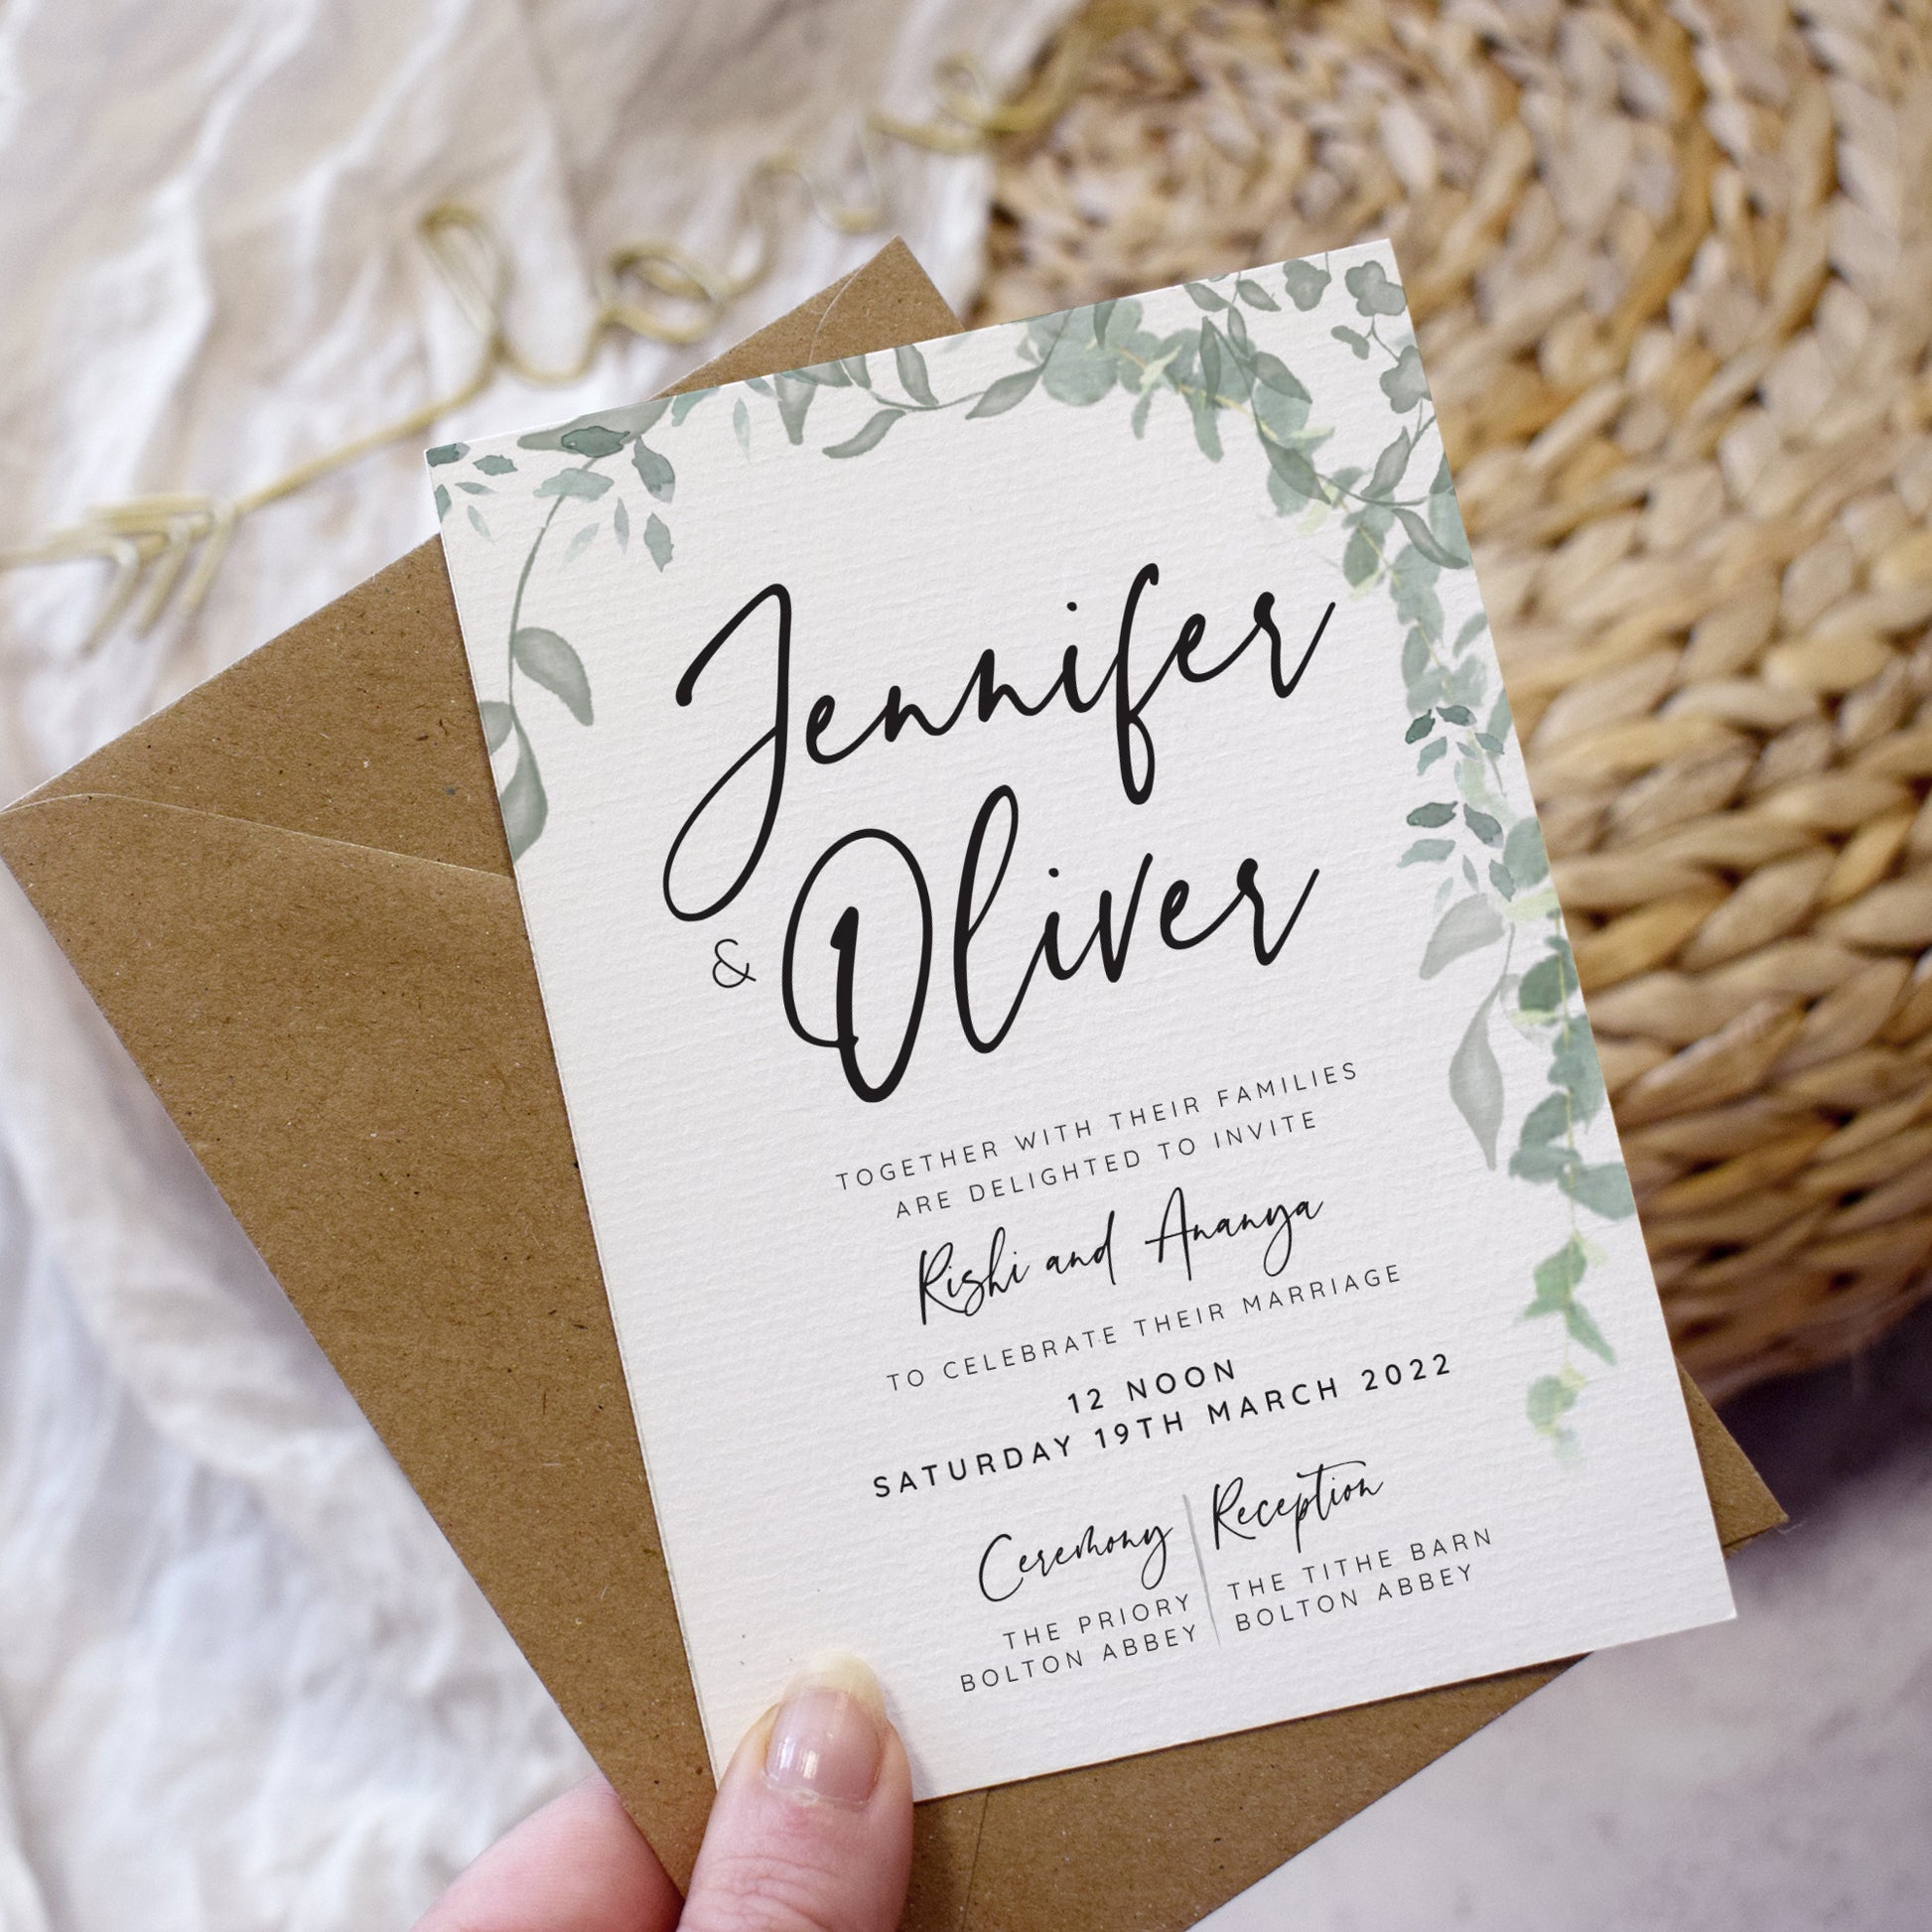 'Greenery' wedding postponement cards featuring eucalyptus and modern typography